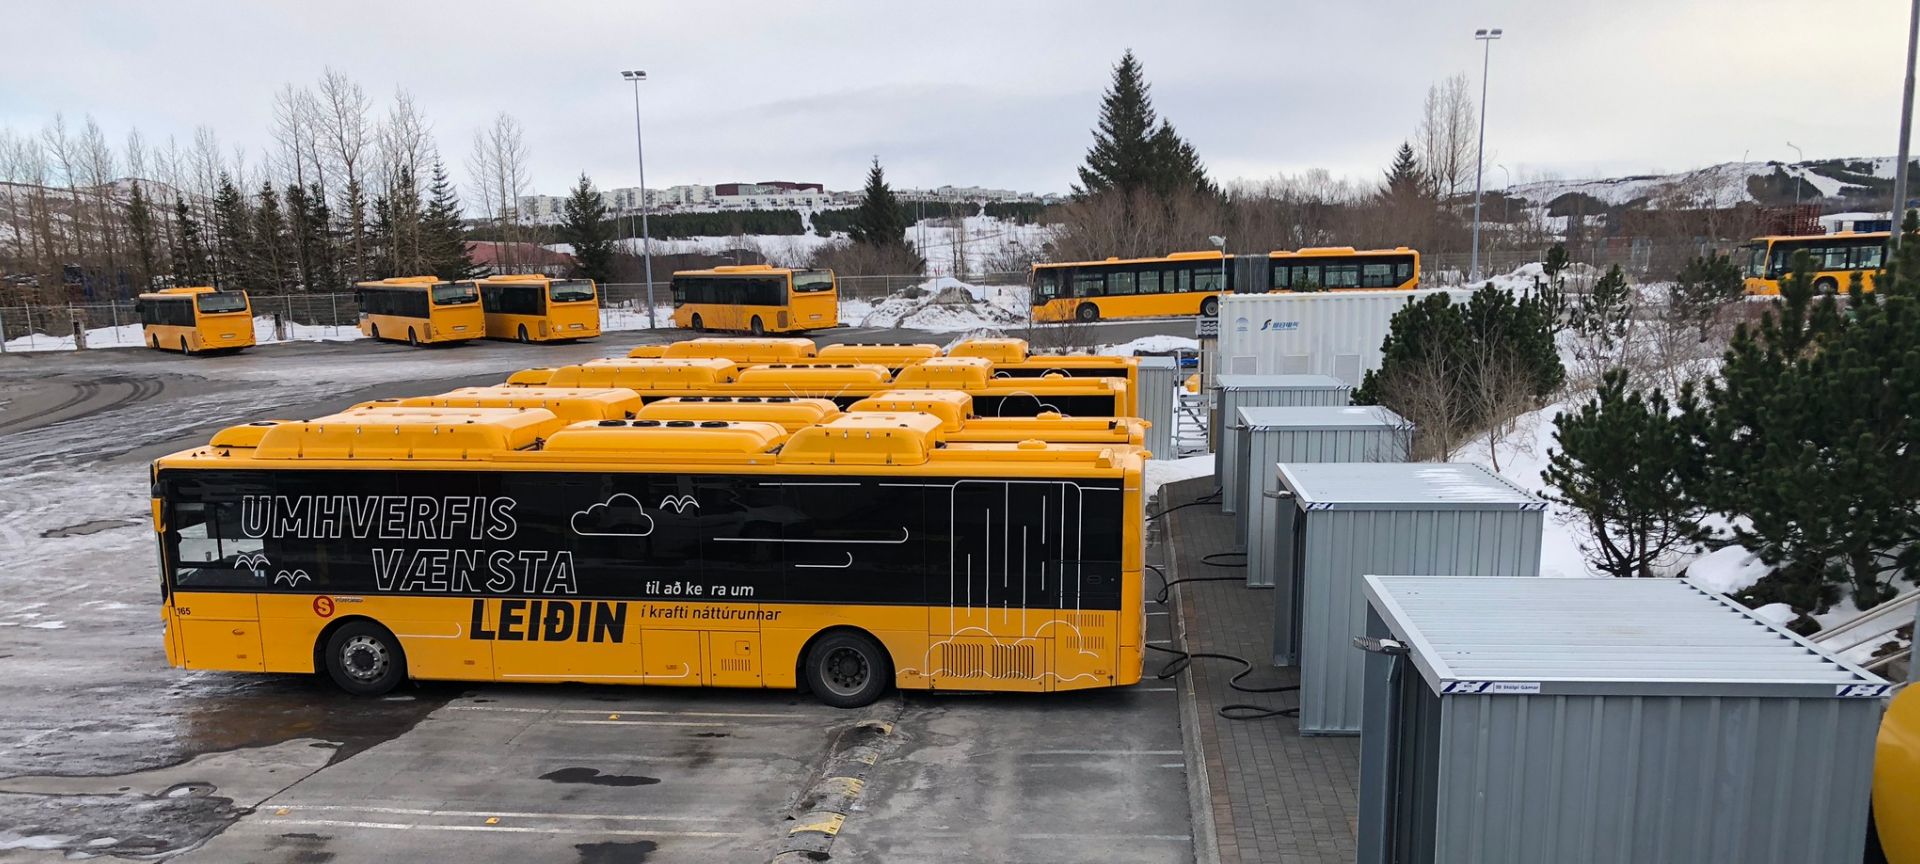 Busstation in Iceland